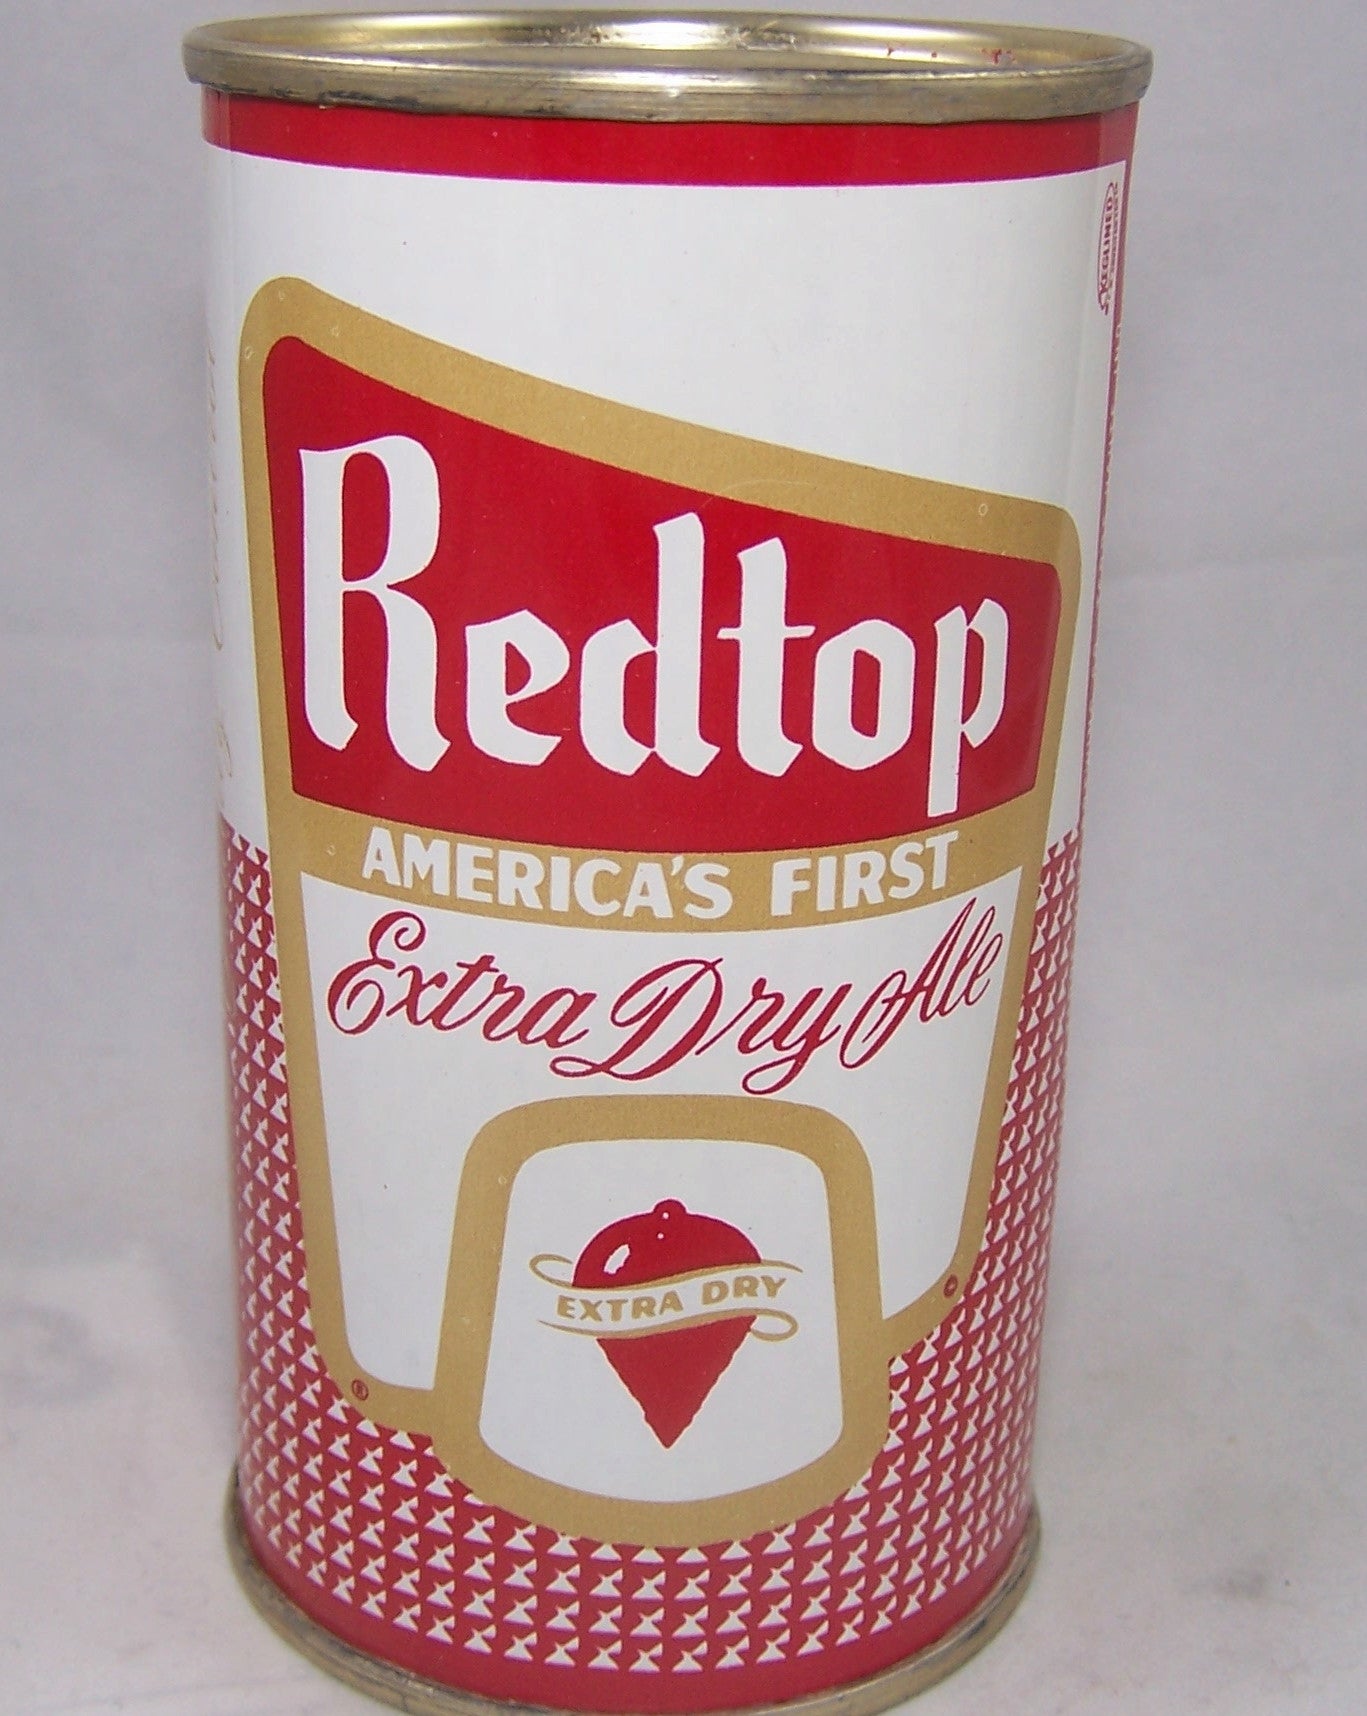 Redtop Extra Dry Ale, USBC N.L (Terre Haute) Rolled Short Sheet, Grade 1/1+ Sold on 09/19/16